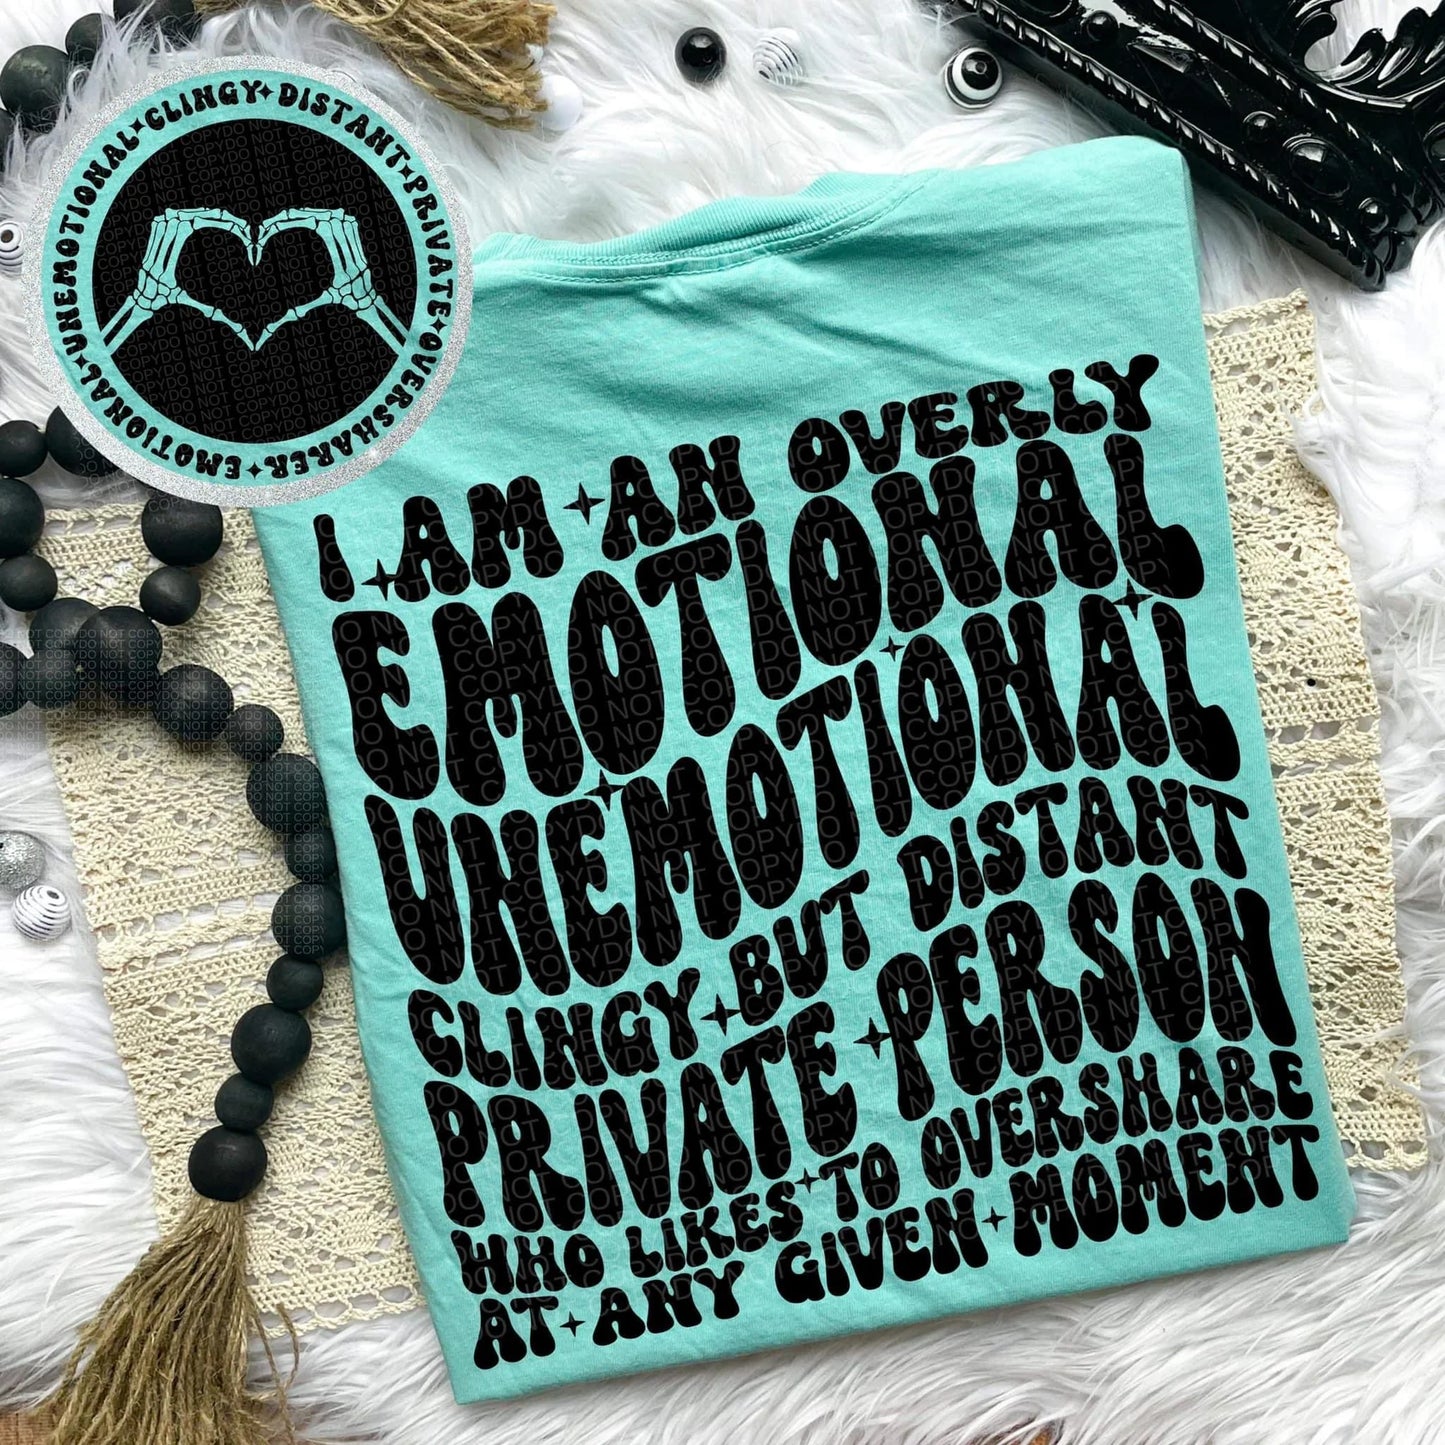 Emotional Unemotional *Ollie & Co. Exclusive*